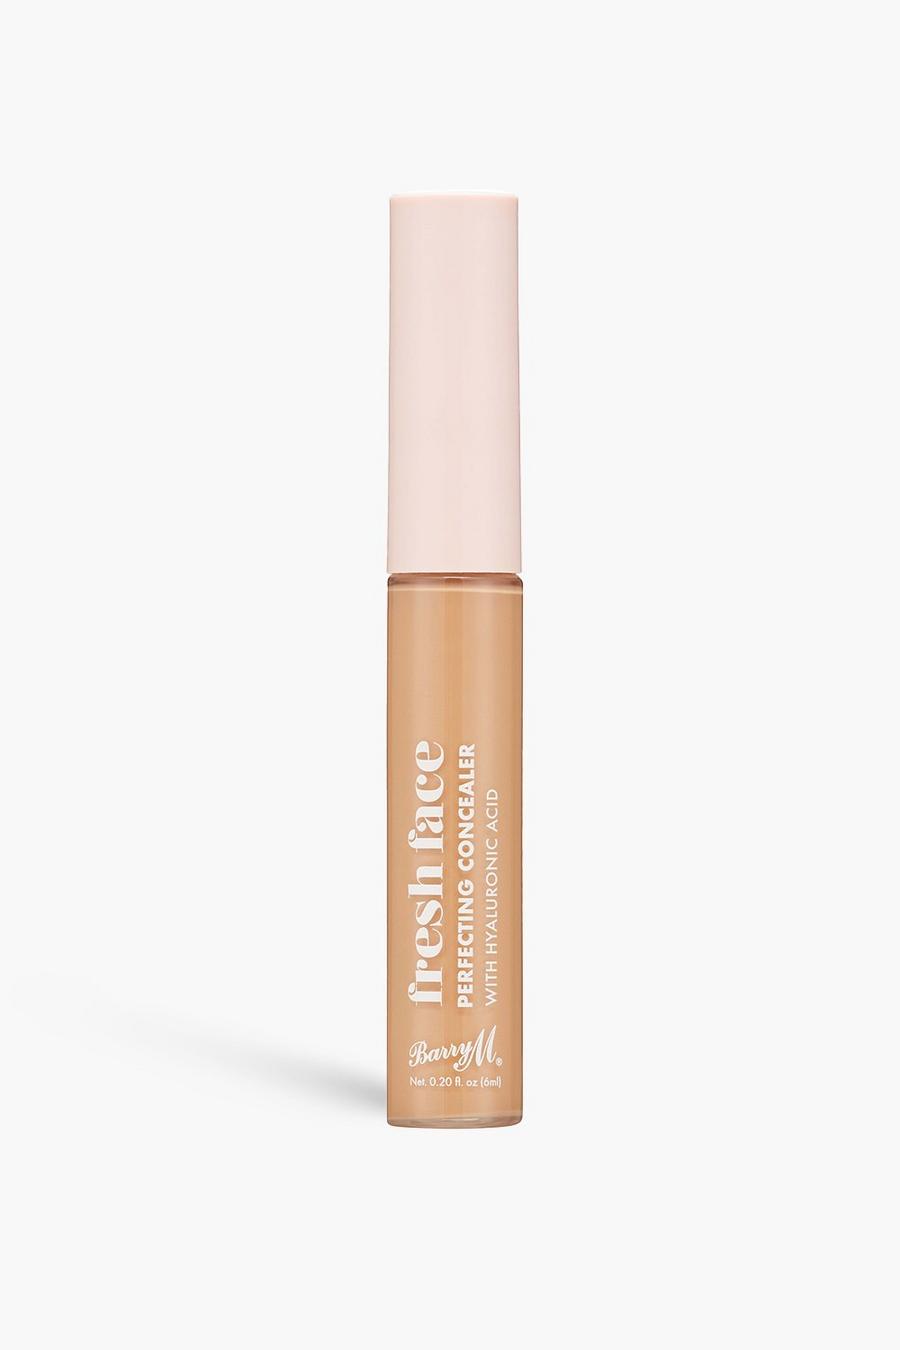 Barry M - Correttore Fresh Face Perfecting Concealer 6, Tan marrón